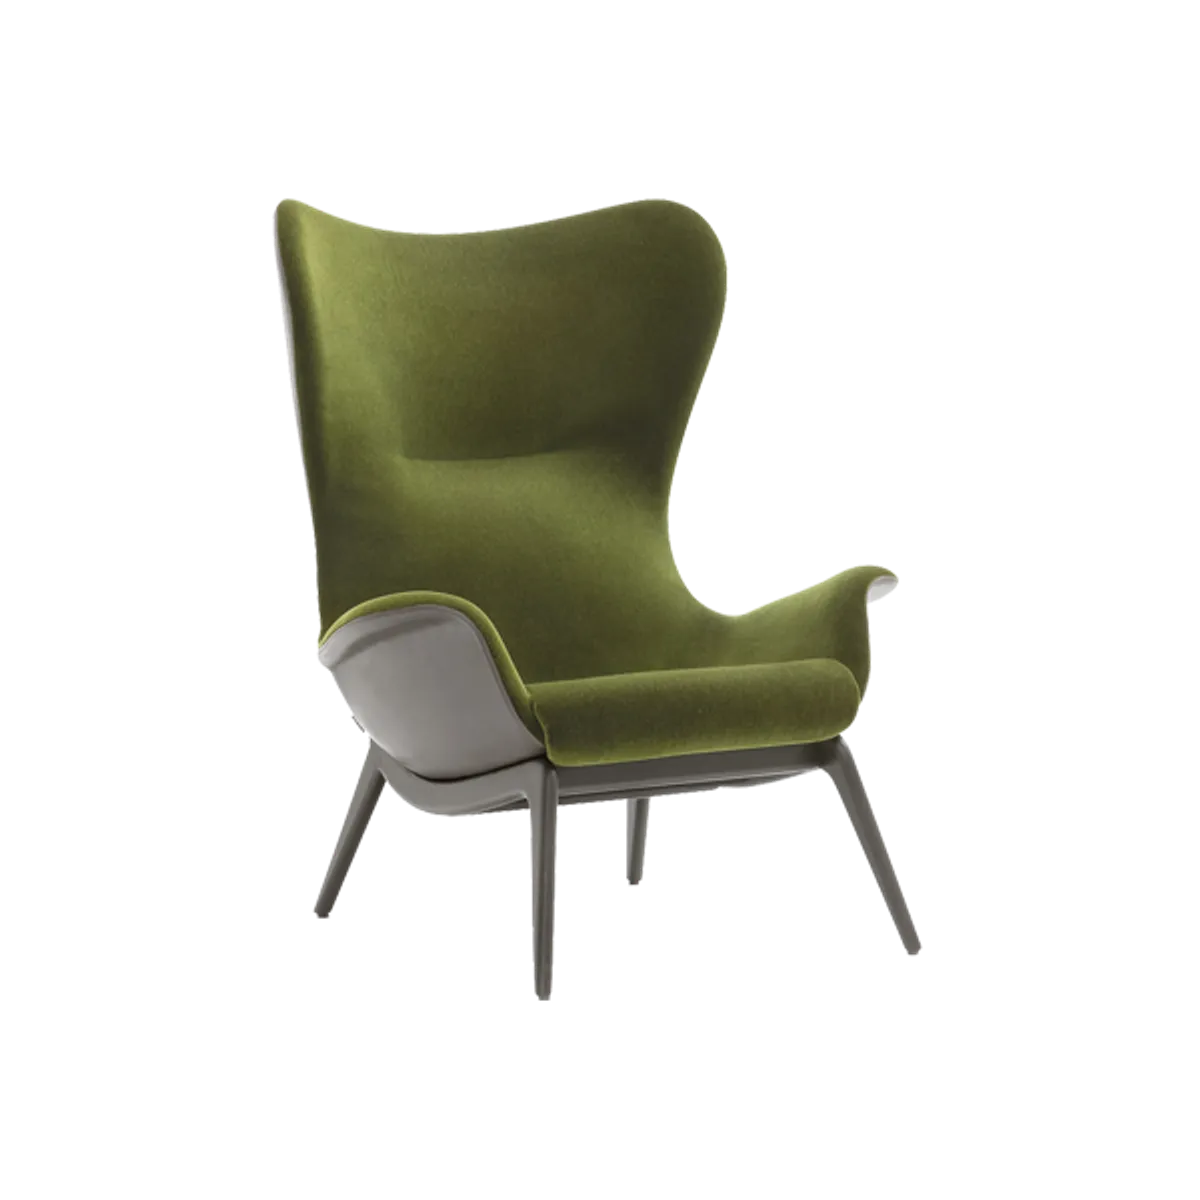 Web Sereen Lounge Chair Hotel Lobby Furniture Inside Out Contracts